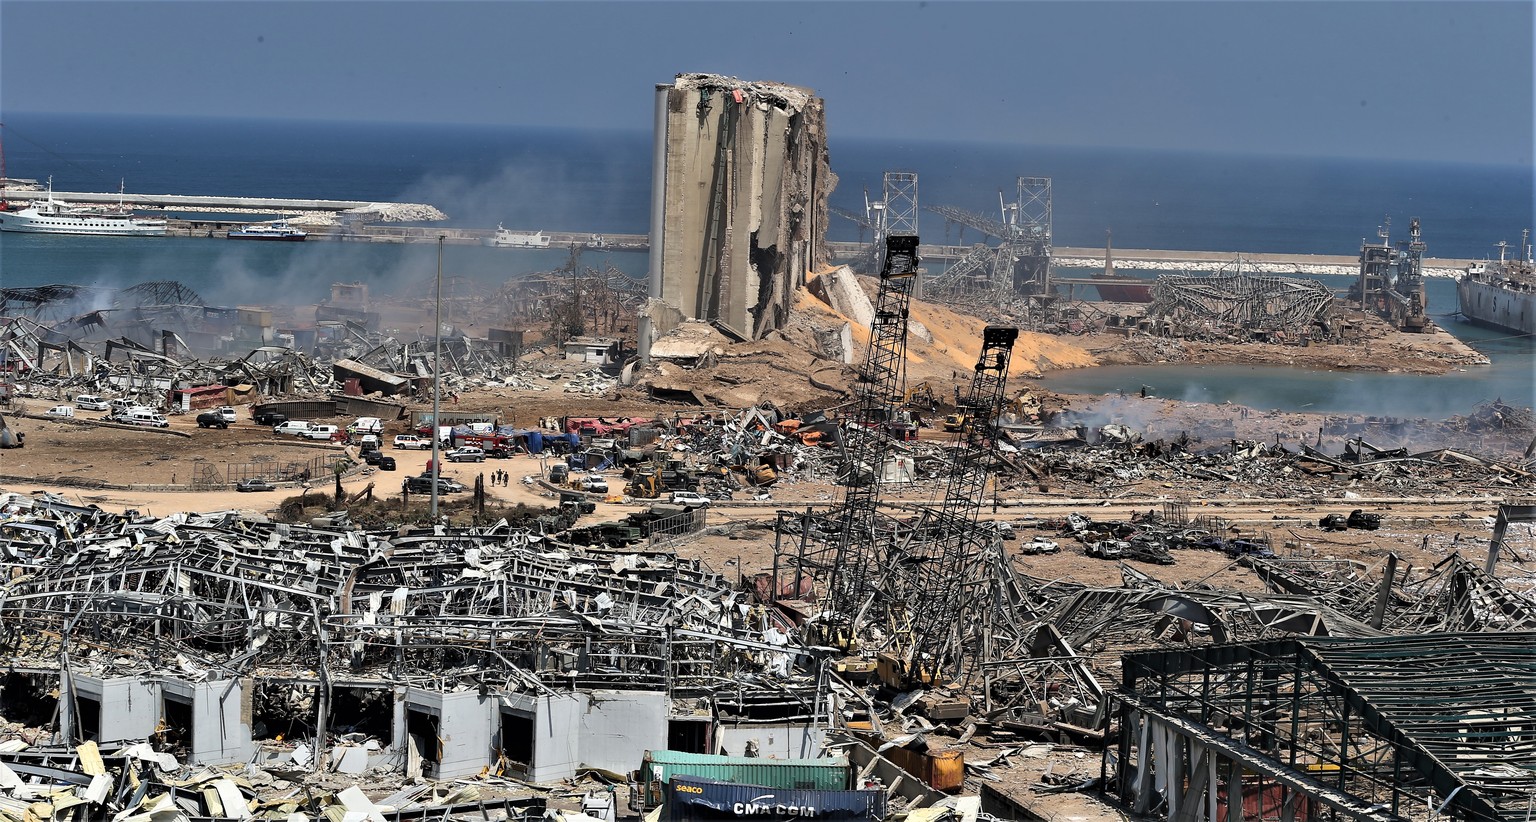 epa08585091 A general view of the destroyed port in the aftermath of a massive explosion in downtown Beirut, Lebanon, 05 August 2020. According to media reports, at least 100 people were killed and mo ...